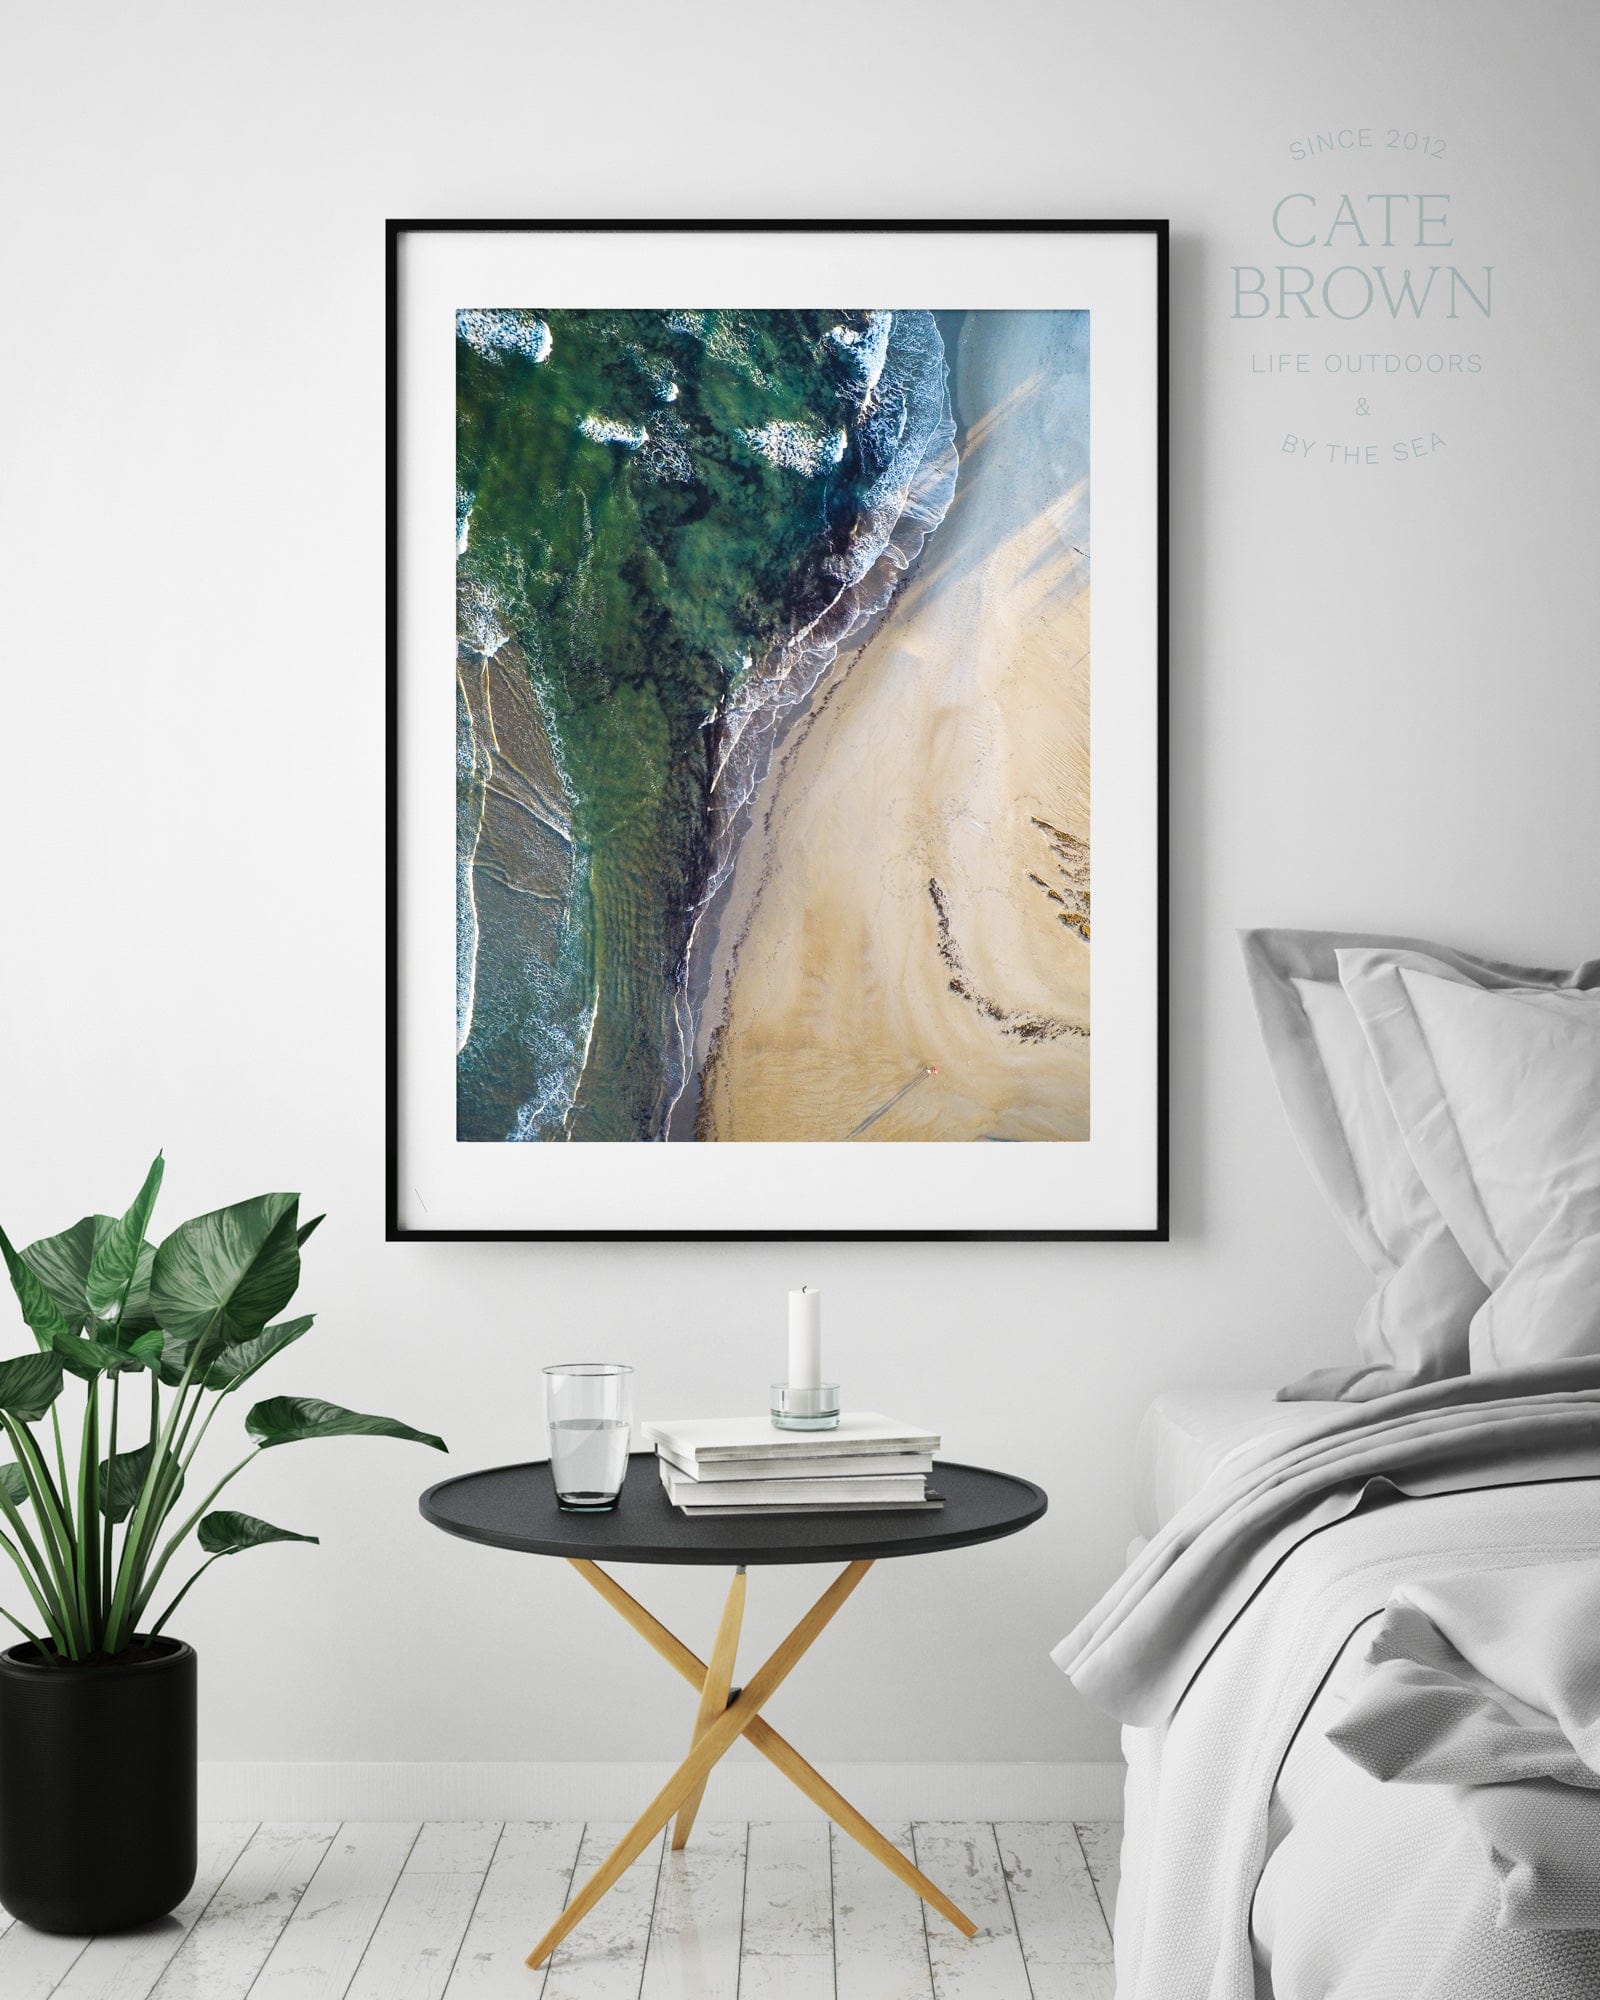 Cate Brown Photo Fine Art Print / 8"x12" / None (Print Only) Narragansett #2  //  Aerial Photography Made to Order Ocean Fine Art